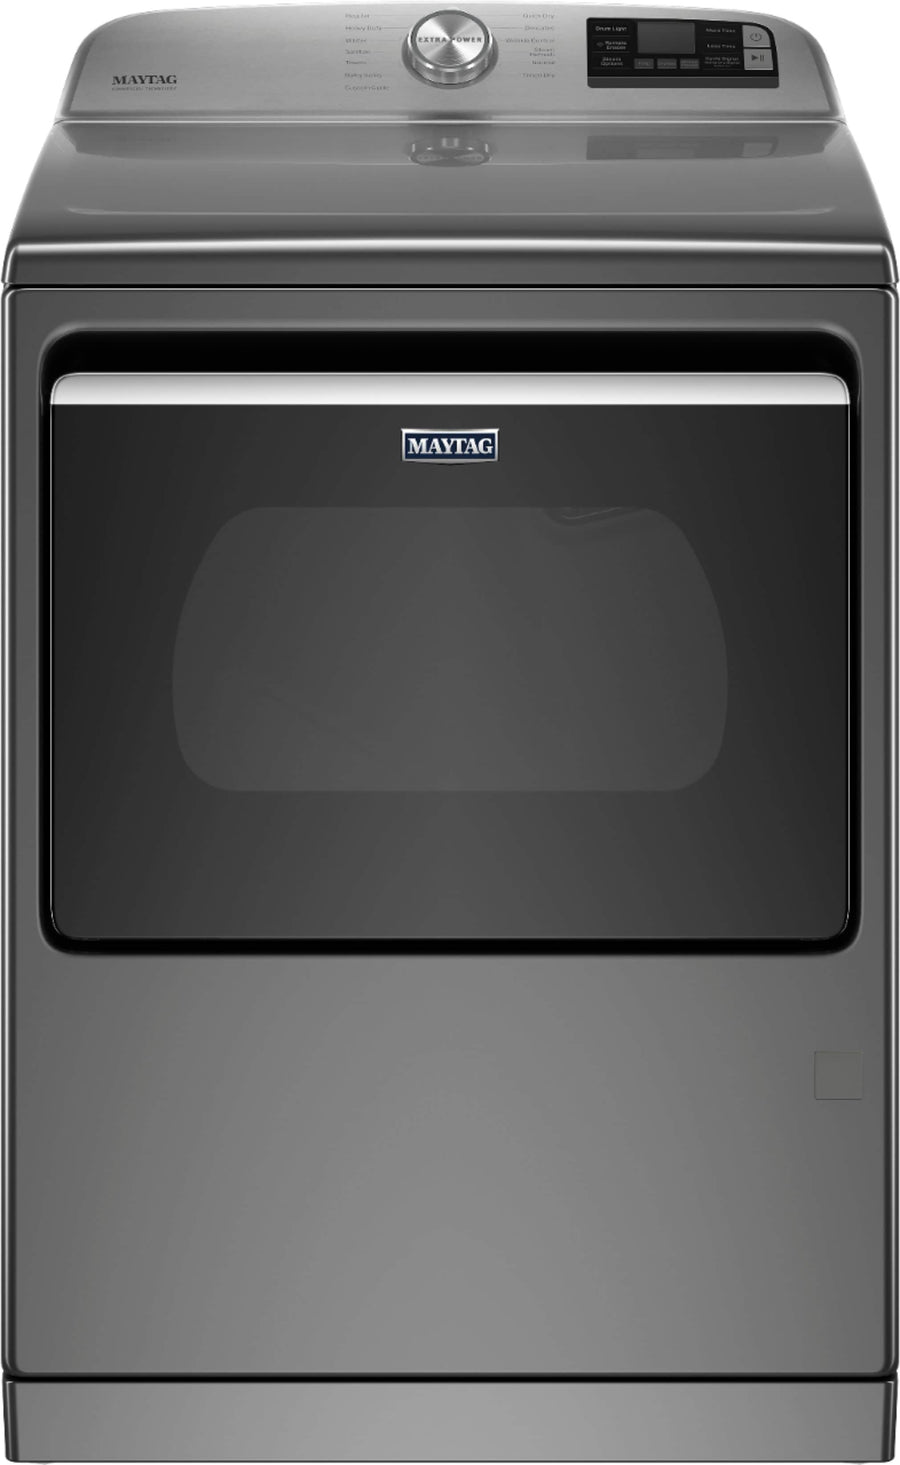 Maytag - 7.4 Cu. Ft. Smart Gas Dryer with Steam and Extra Power Button - Metallic slate_0